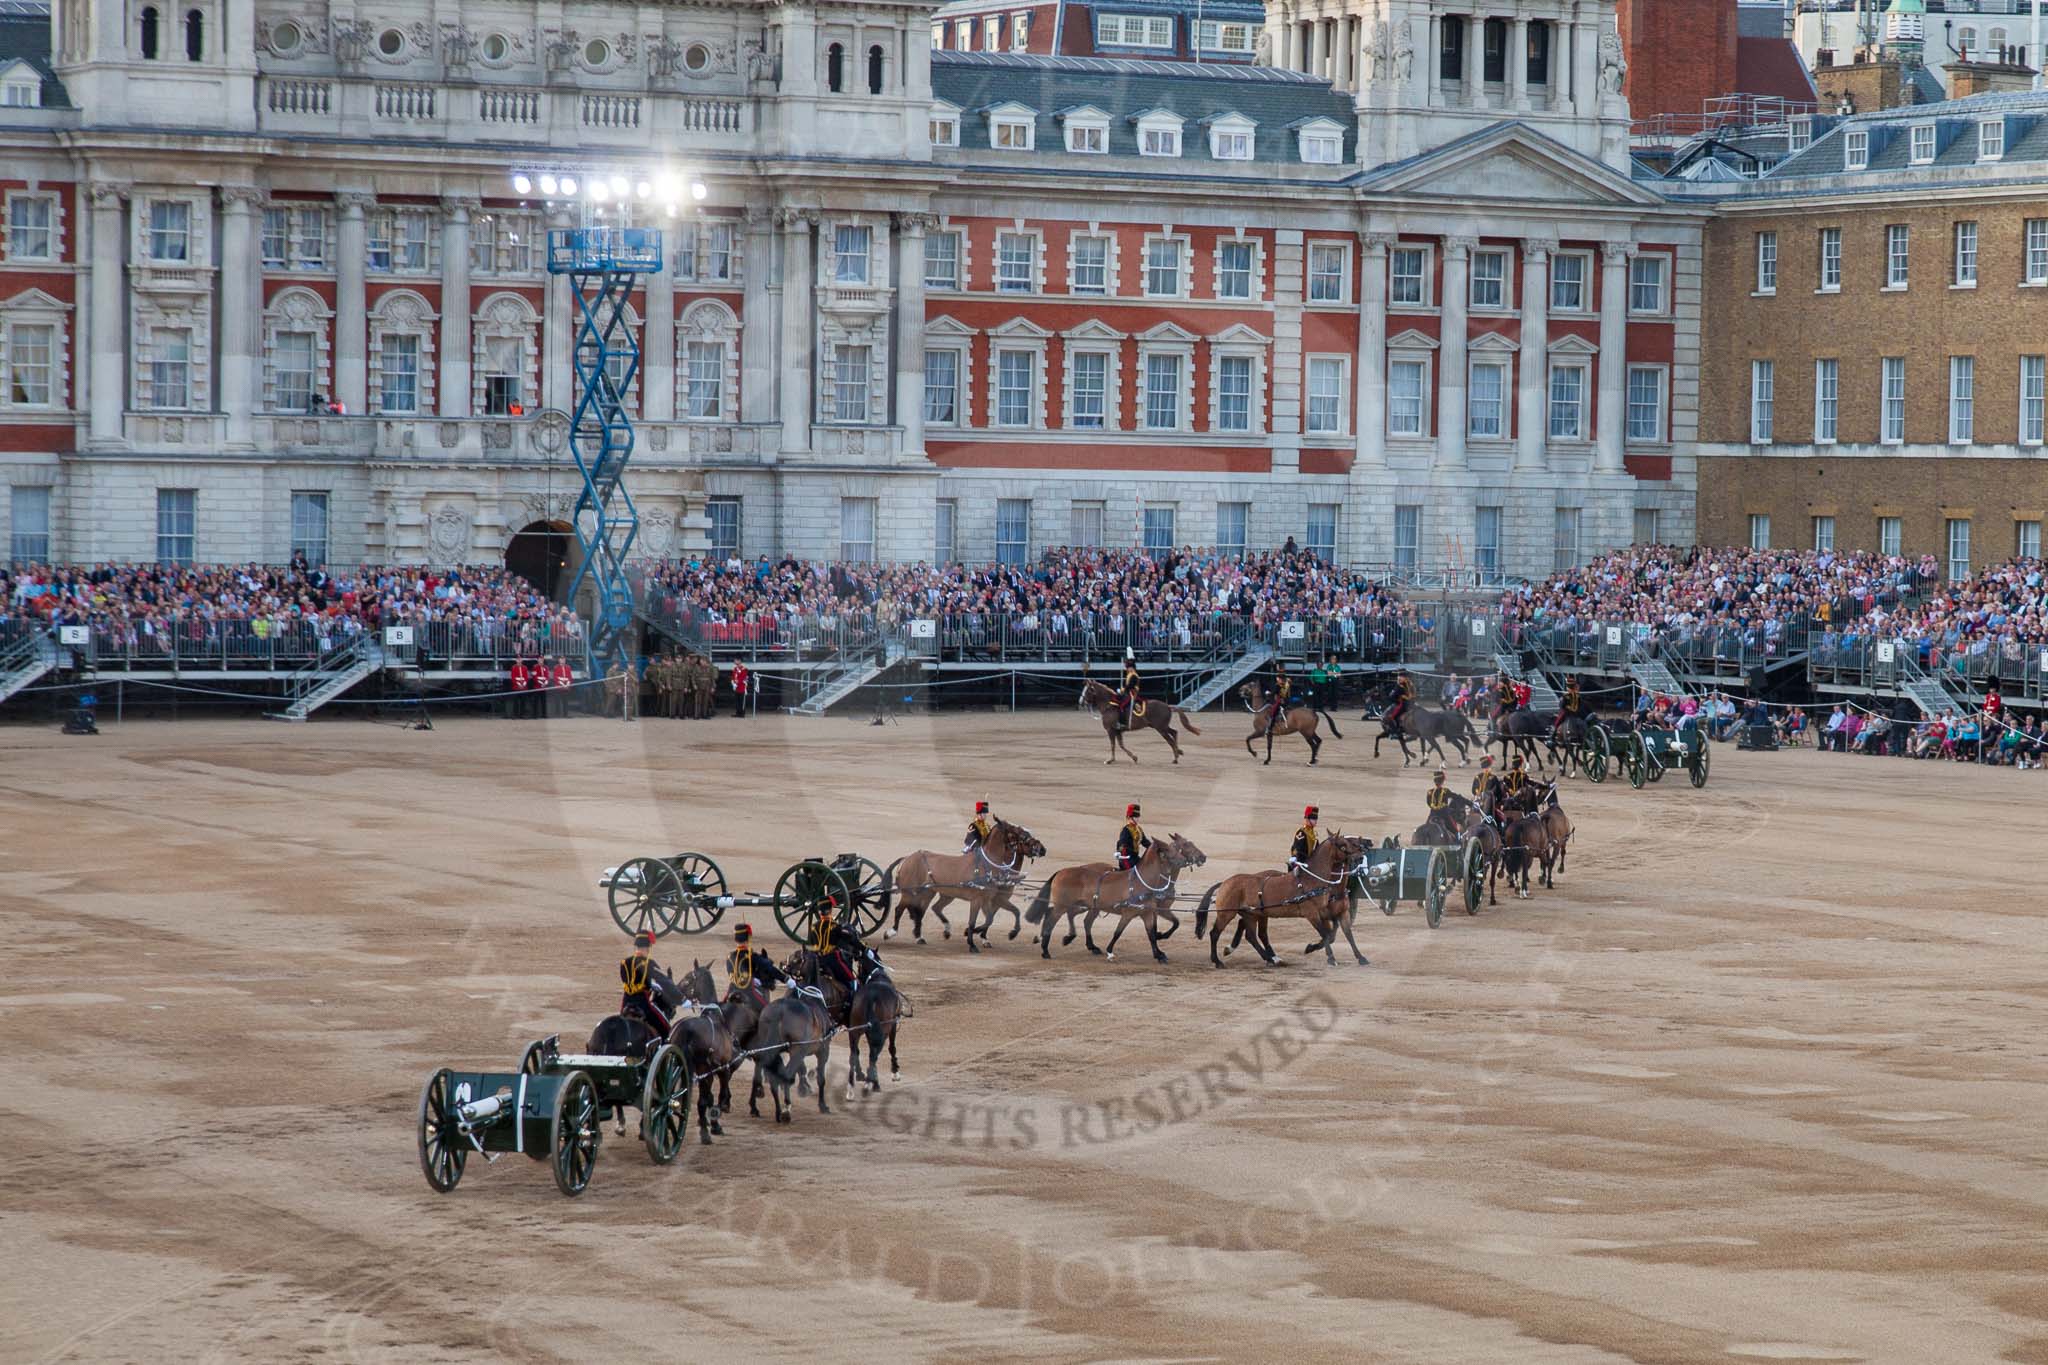 Beating Retreat 2014.
Horse Guards Parade, Westminster,
London SW1A,

United Kingdom,
on 11 June 2014 at 20:44, image #182